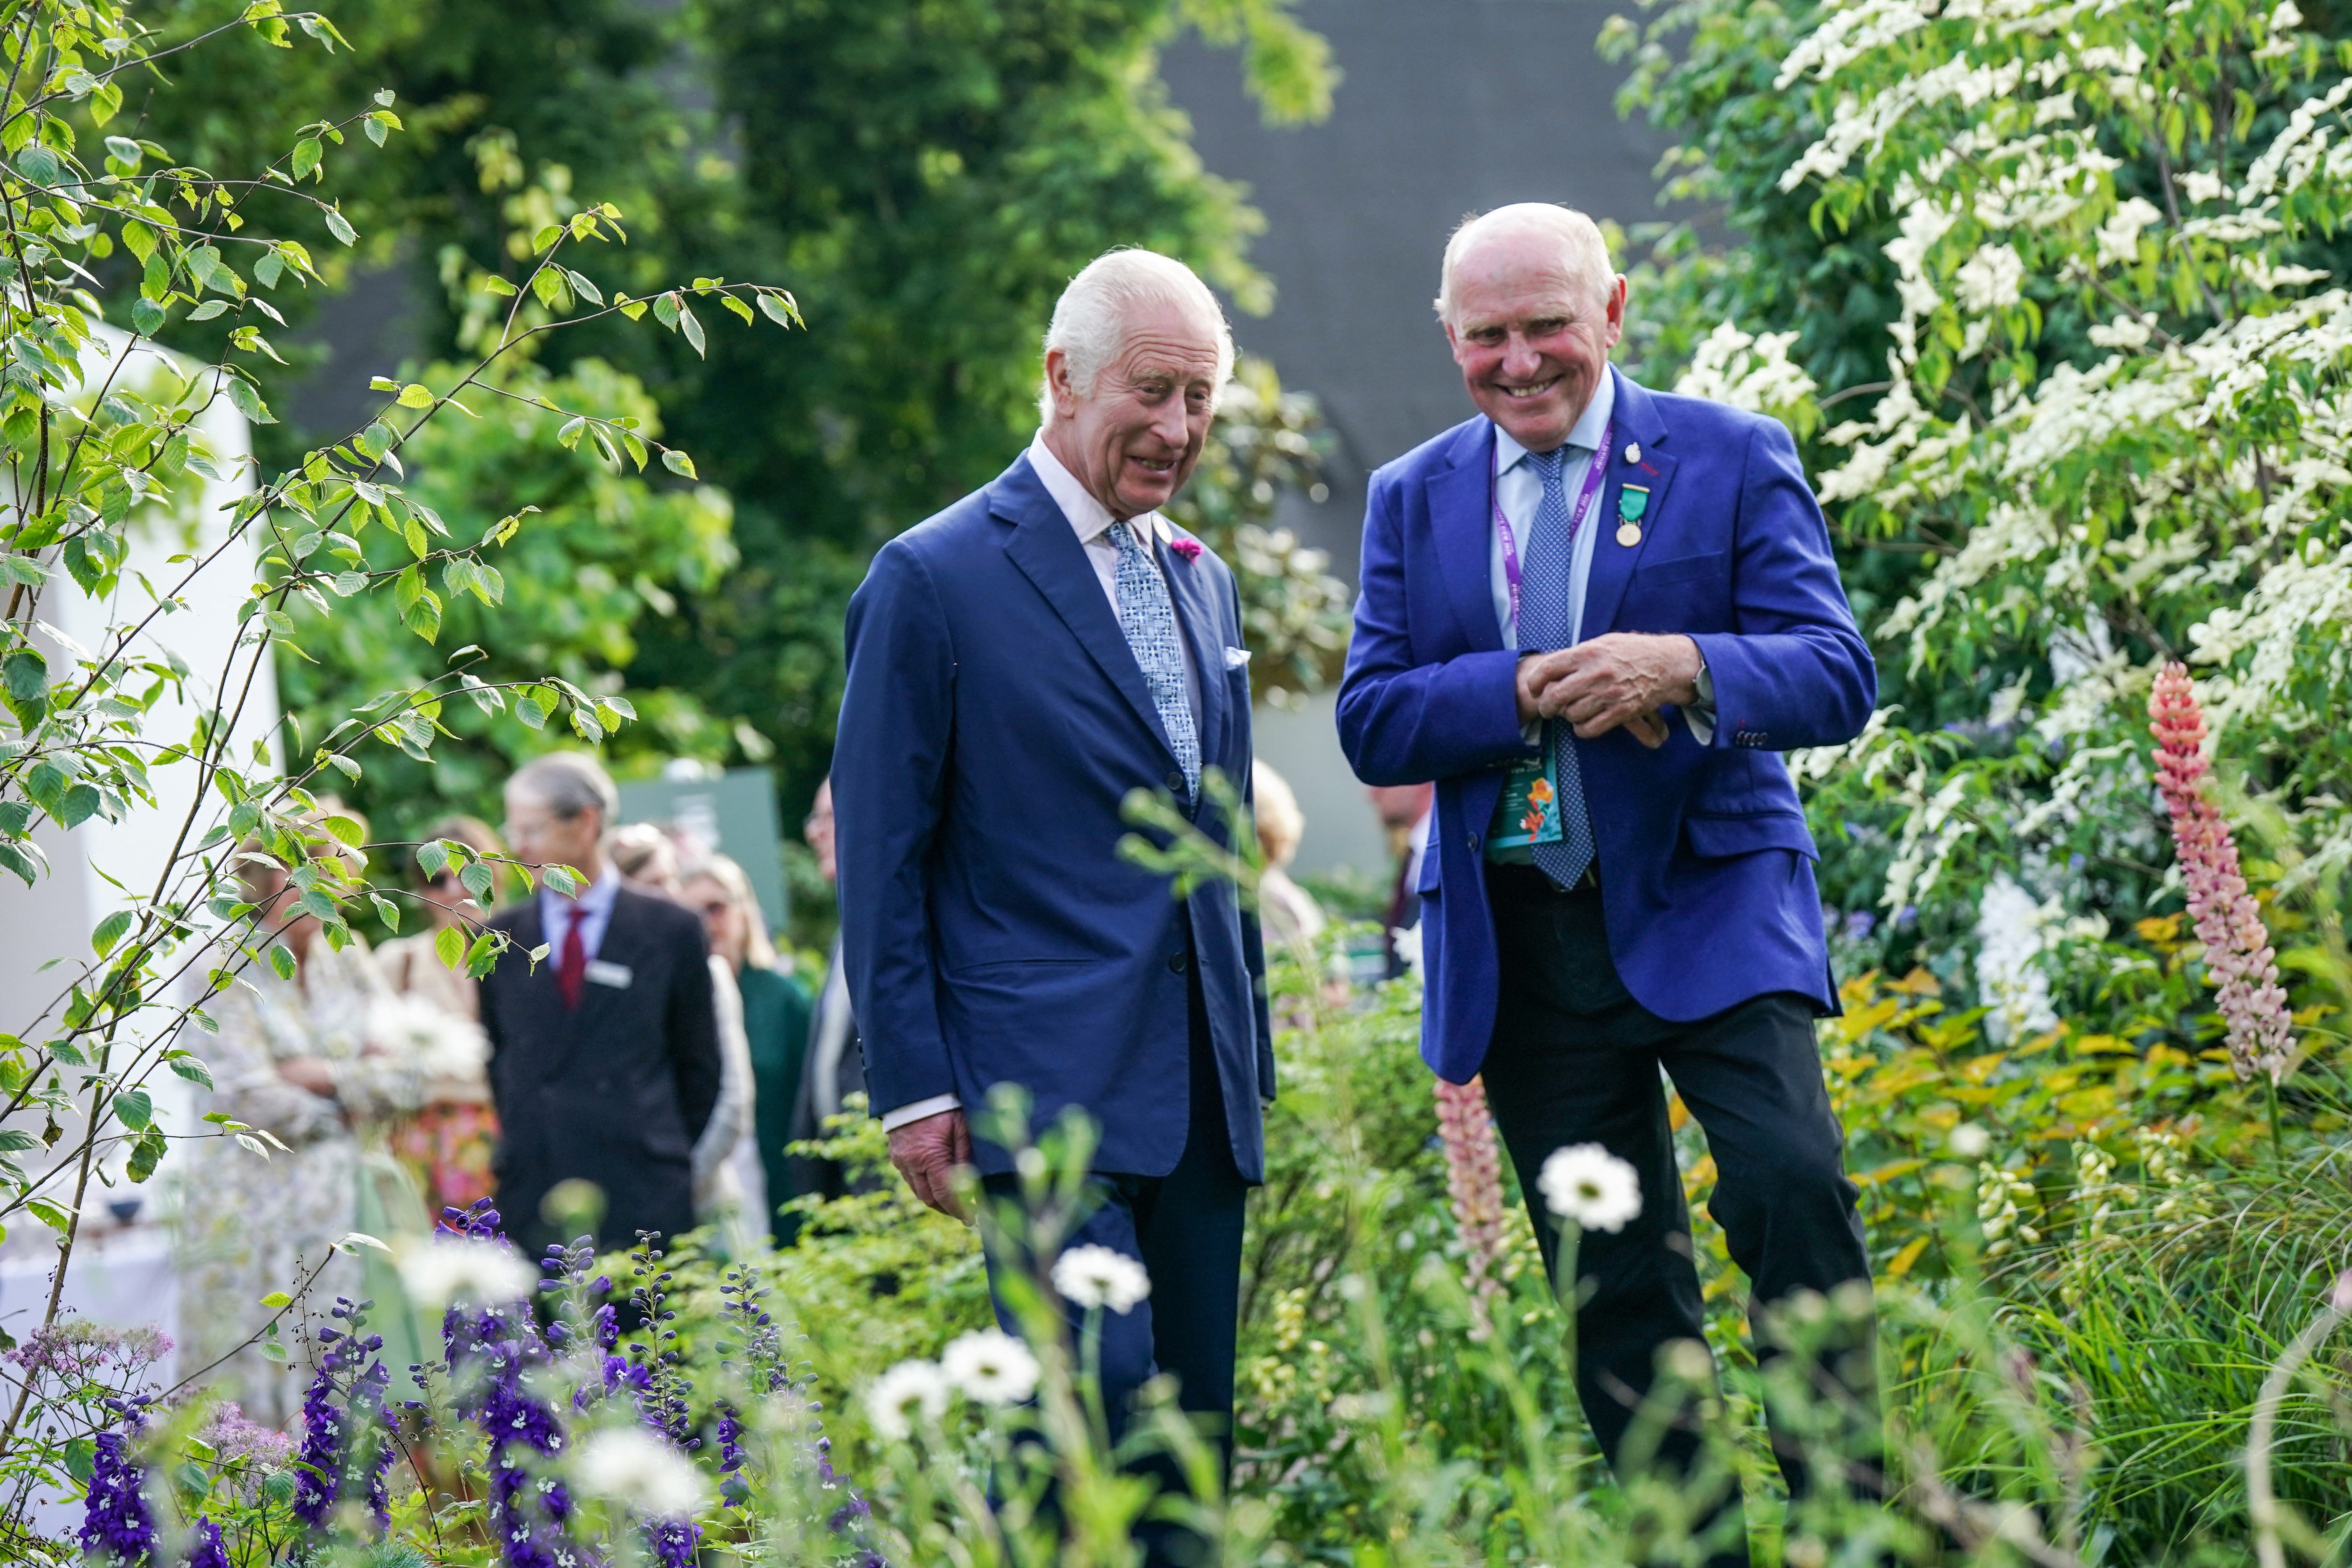 King Charles visited the Chelsea Flower Show ahead of its public opening last week